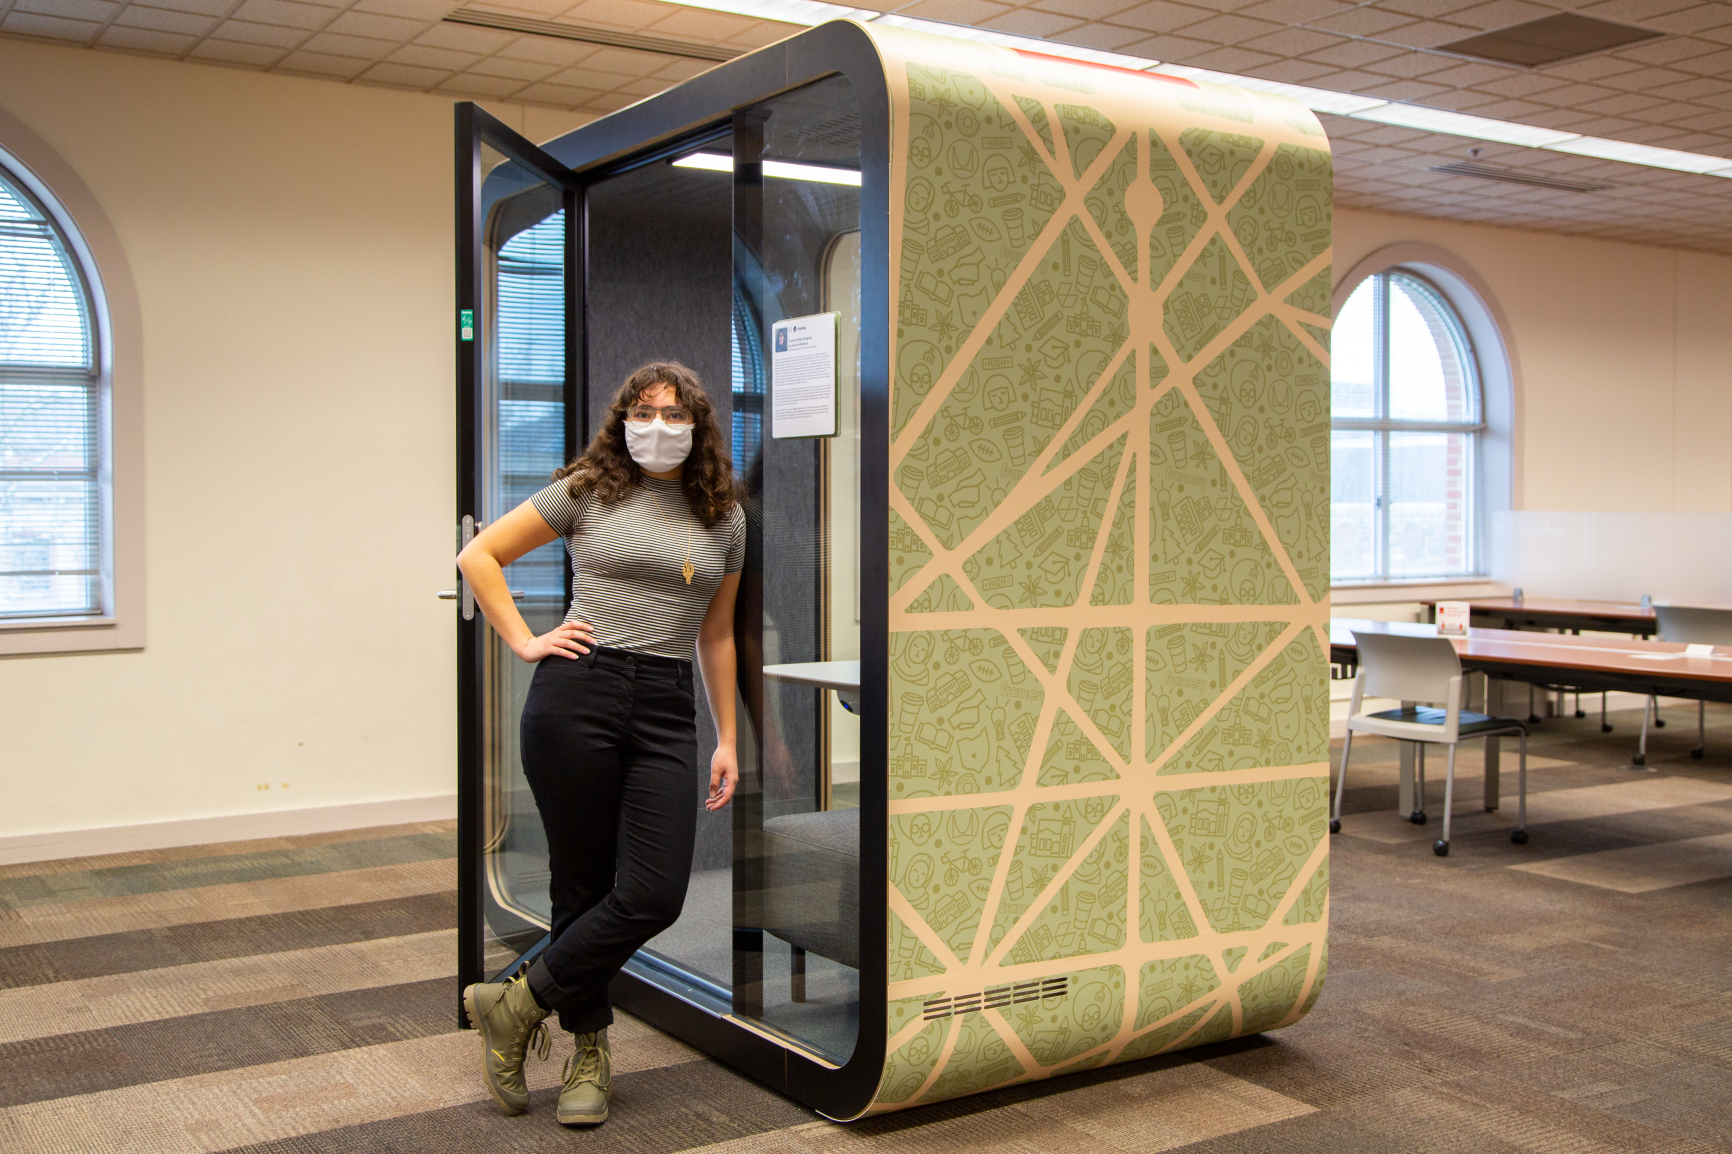 Framery pods designed by Ohio State students and installed at The Ohio State University by Continental Office